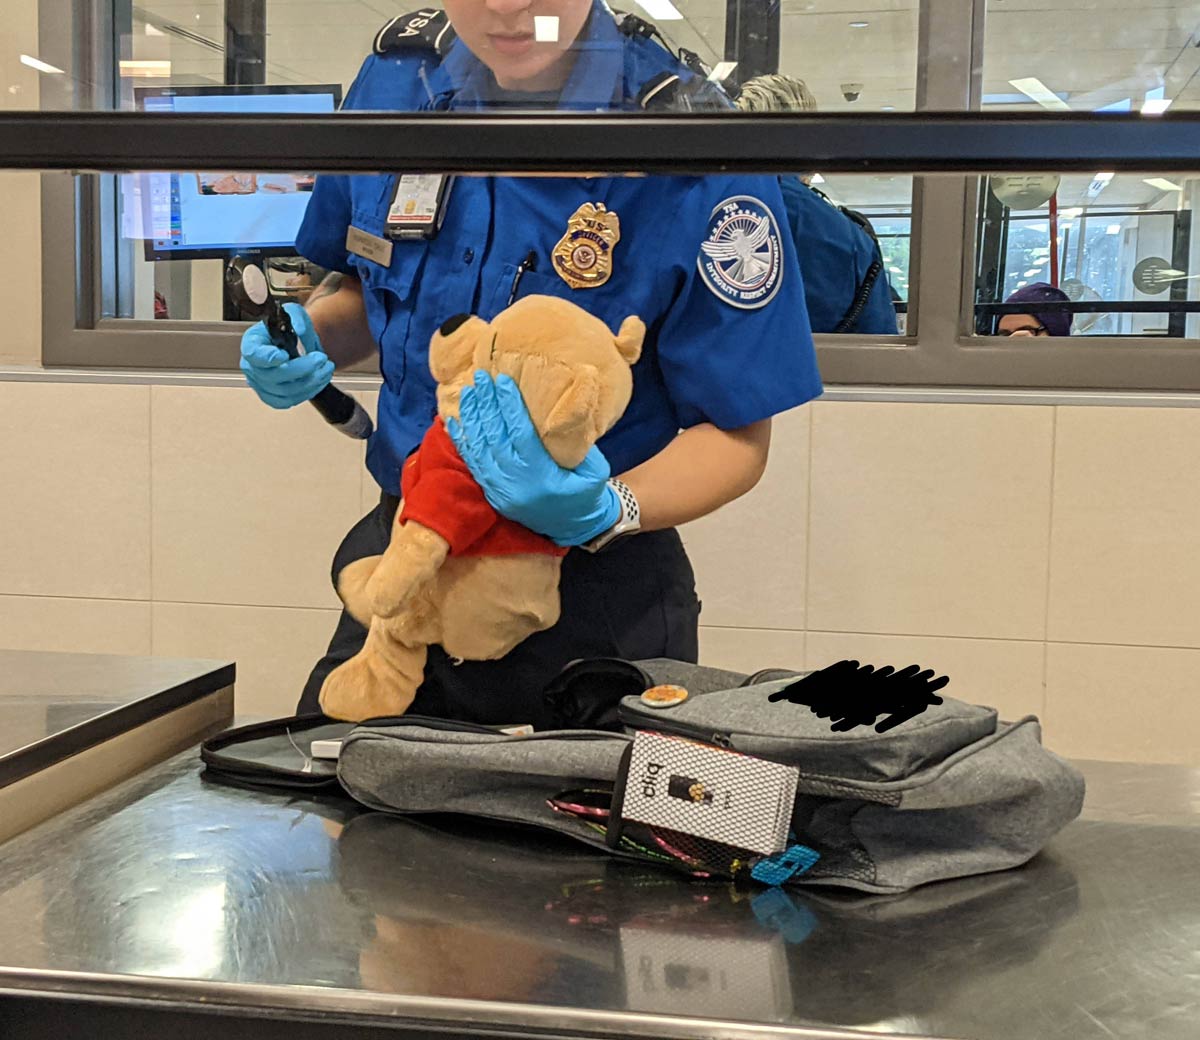 TSA stopped to inspect my silly old bear while a weed vape was in my backpack pocket